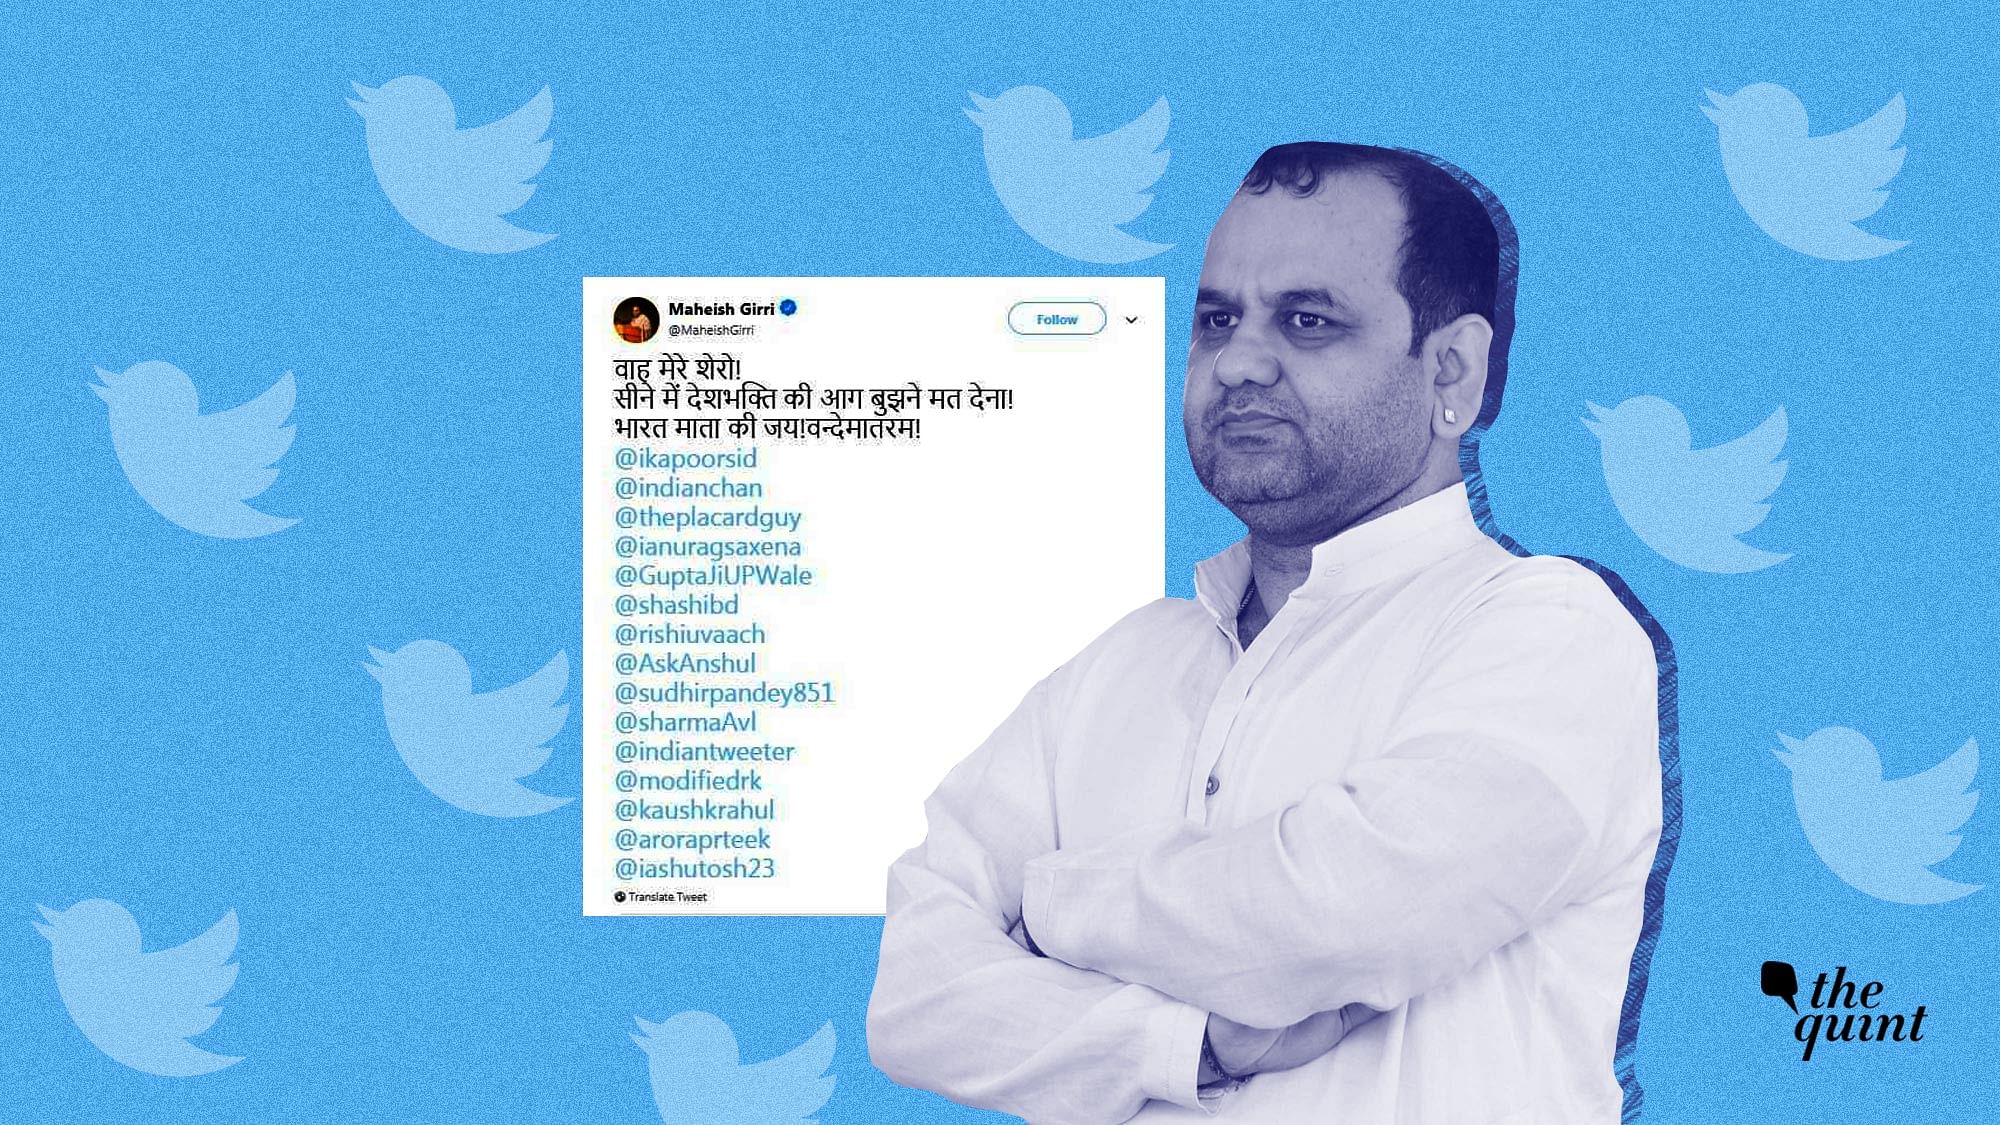 In a tweet posted on 19 February, BJP MP from East Delhi Maheish Girri has praised the admins of the ‘Clean the Nation’ Facebook group which targets ‘anti-nationals’ posting on social media in the aftermath of the Pulwama attack.